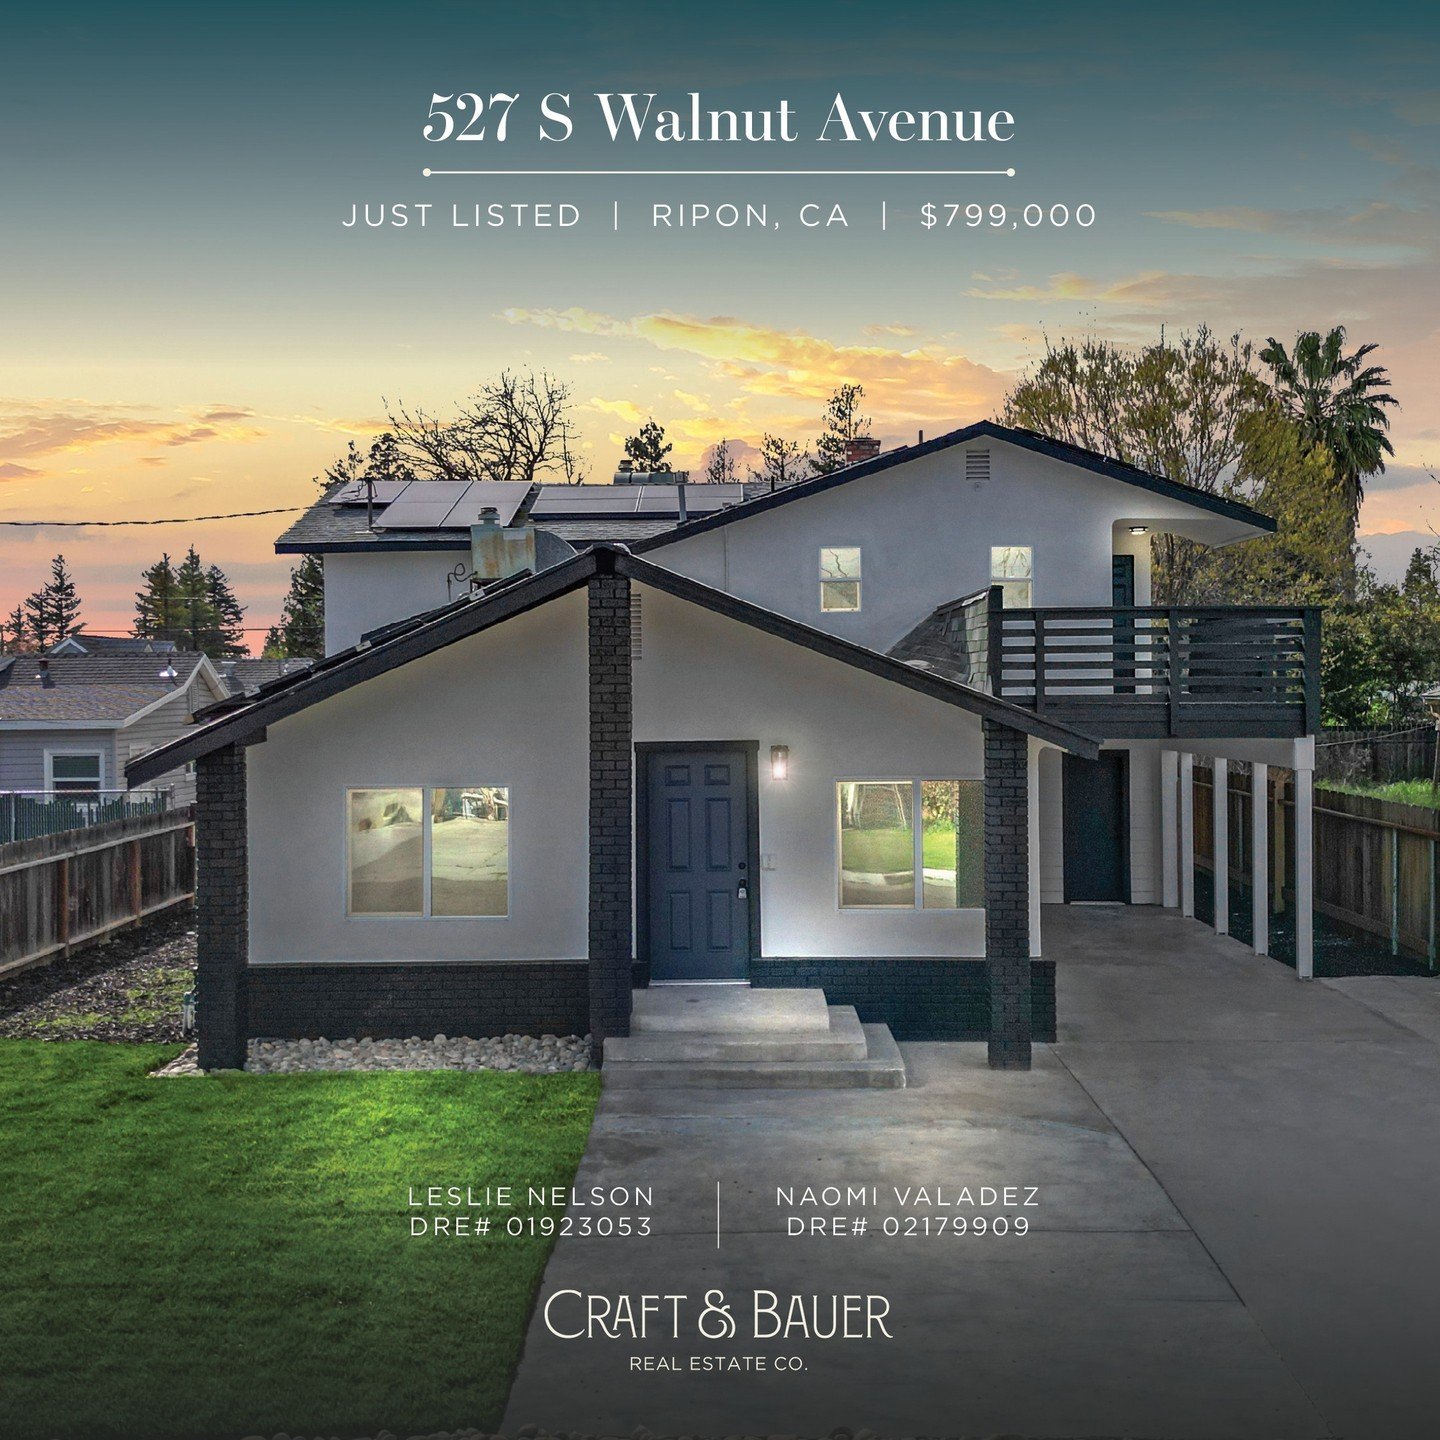 JUST LISTED 👏 This is a multi-unit property in the city of Ripon that has been renovated down to the studs!⁠
⁠
🏡 527 S Walnut Avenue⁠
📍 Ripon, CA⁠
💰 $799,000⁠
⁠
Both units are adorned with LVP flooring, quartz countertops, new appliances, new cab